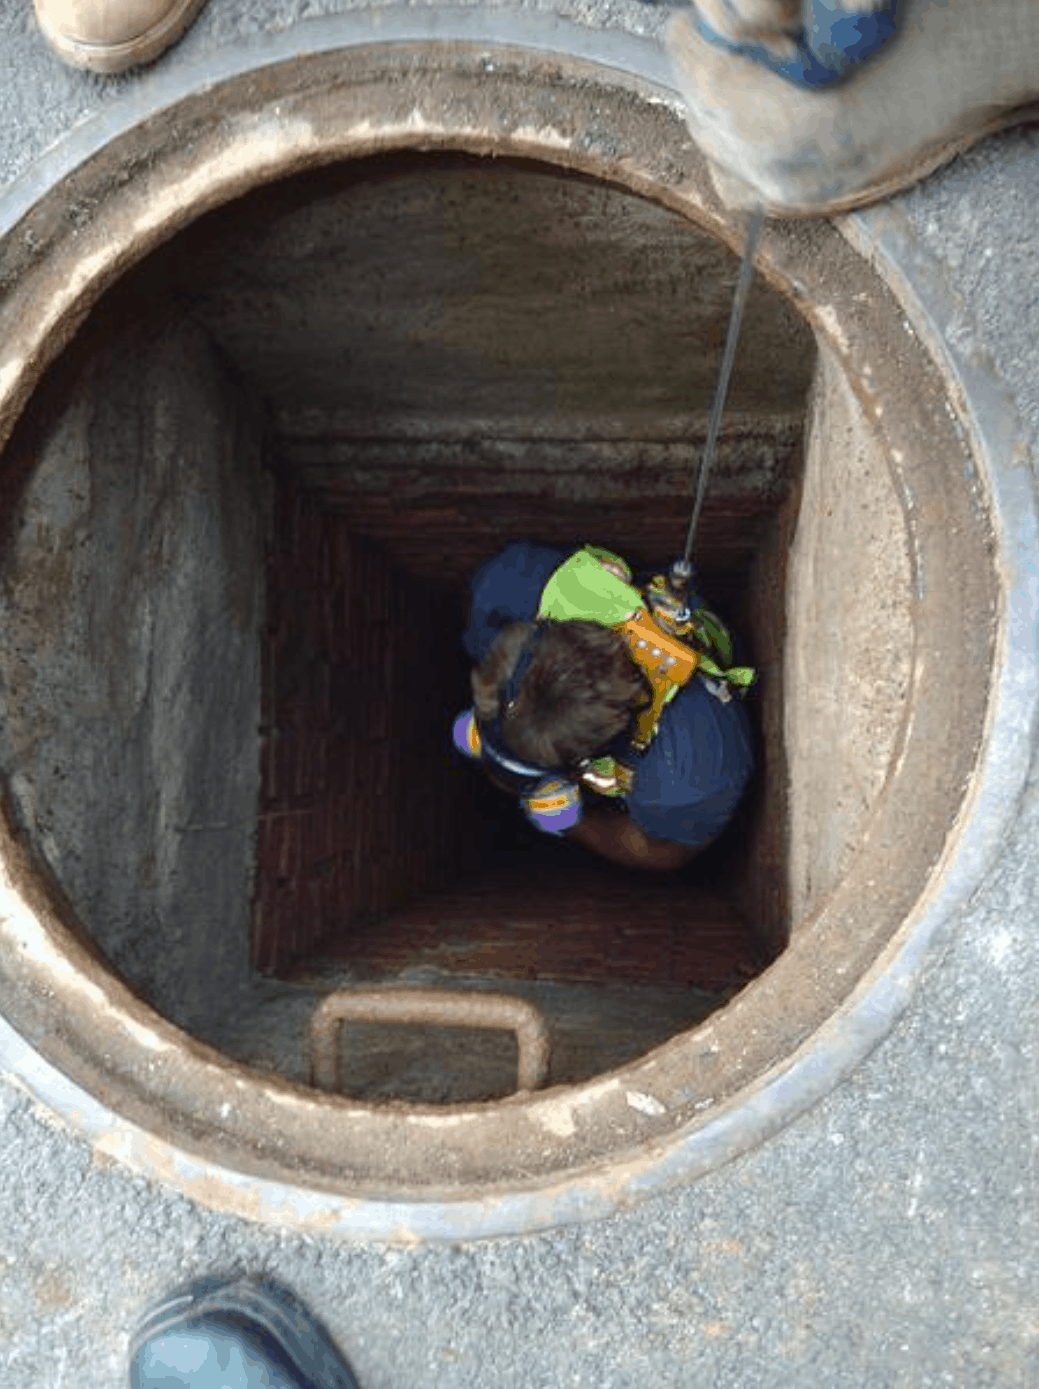 technician from long island sewer and water main being lowered into sewer.